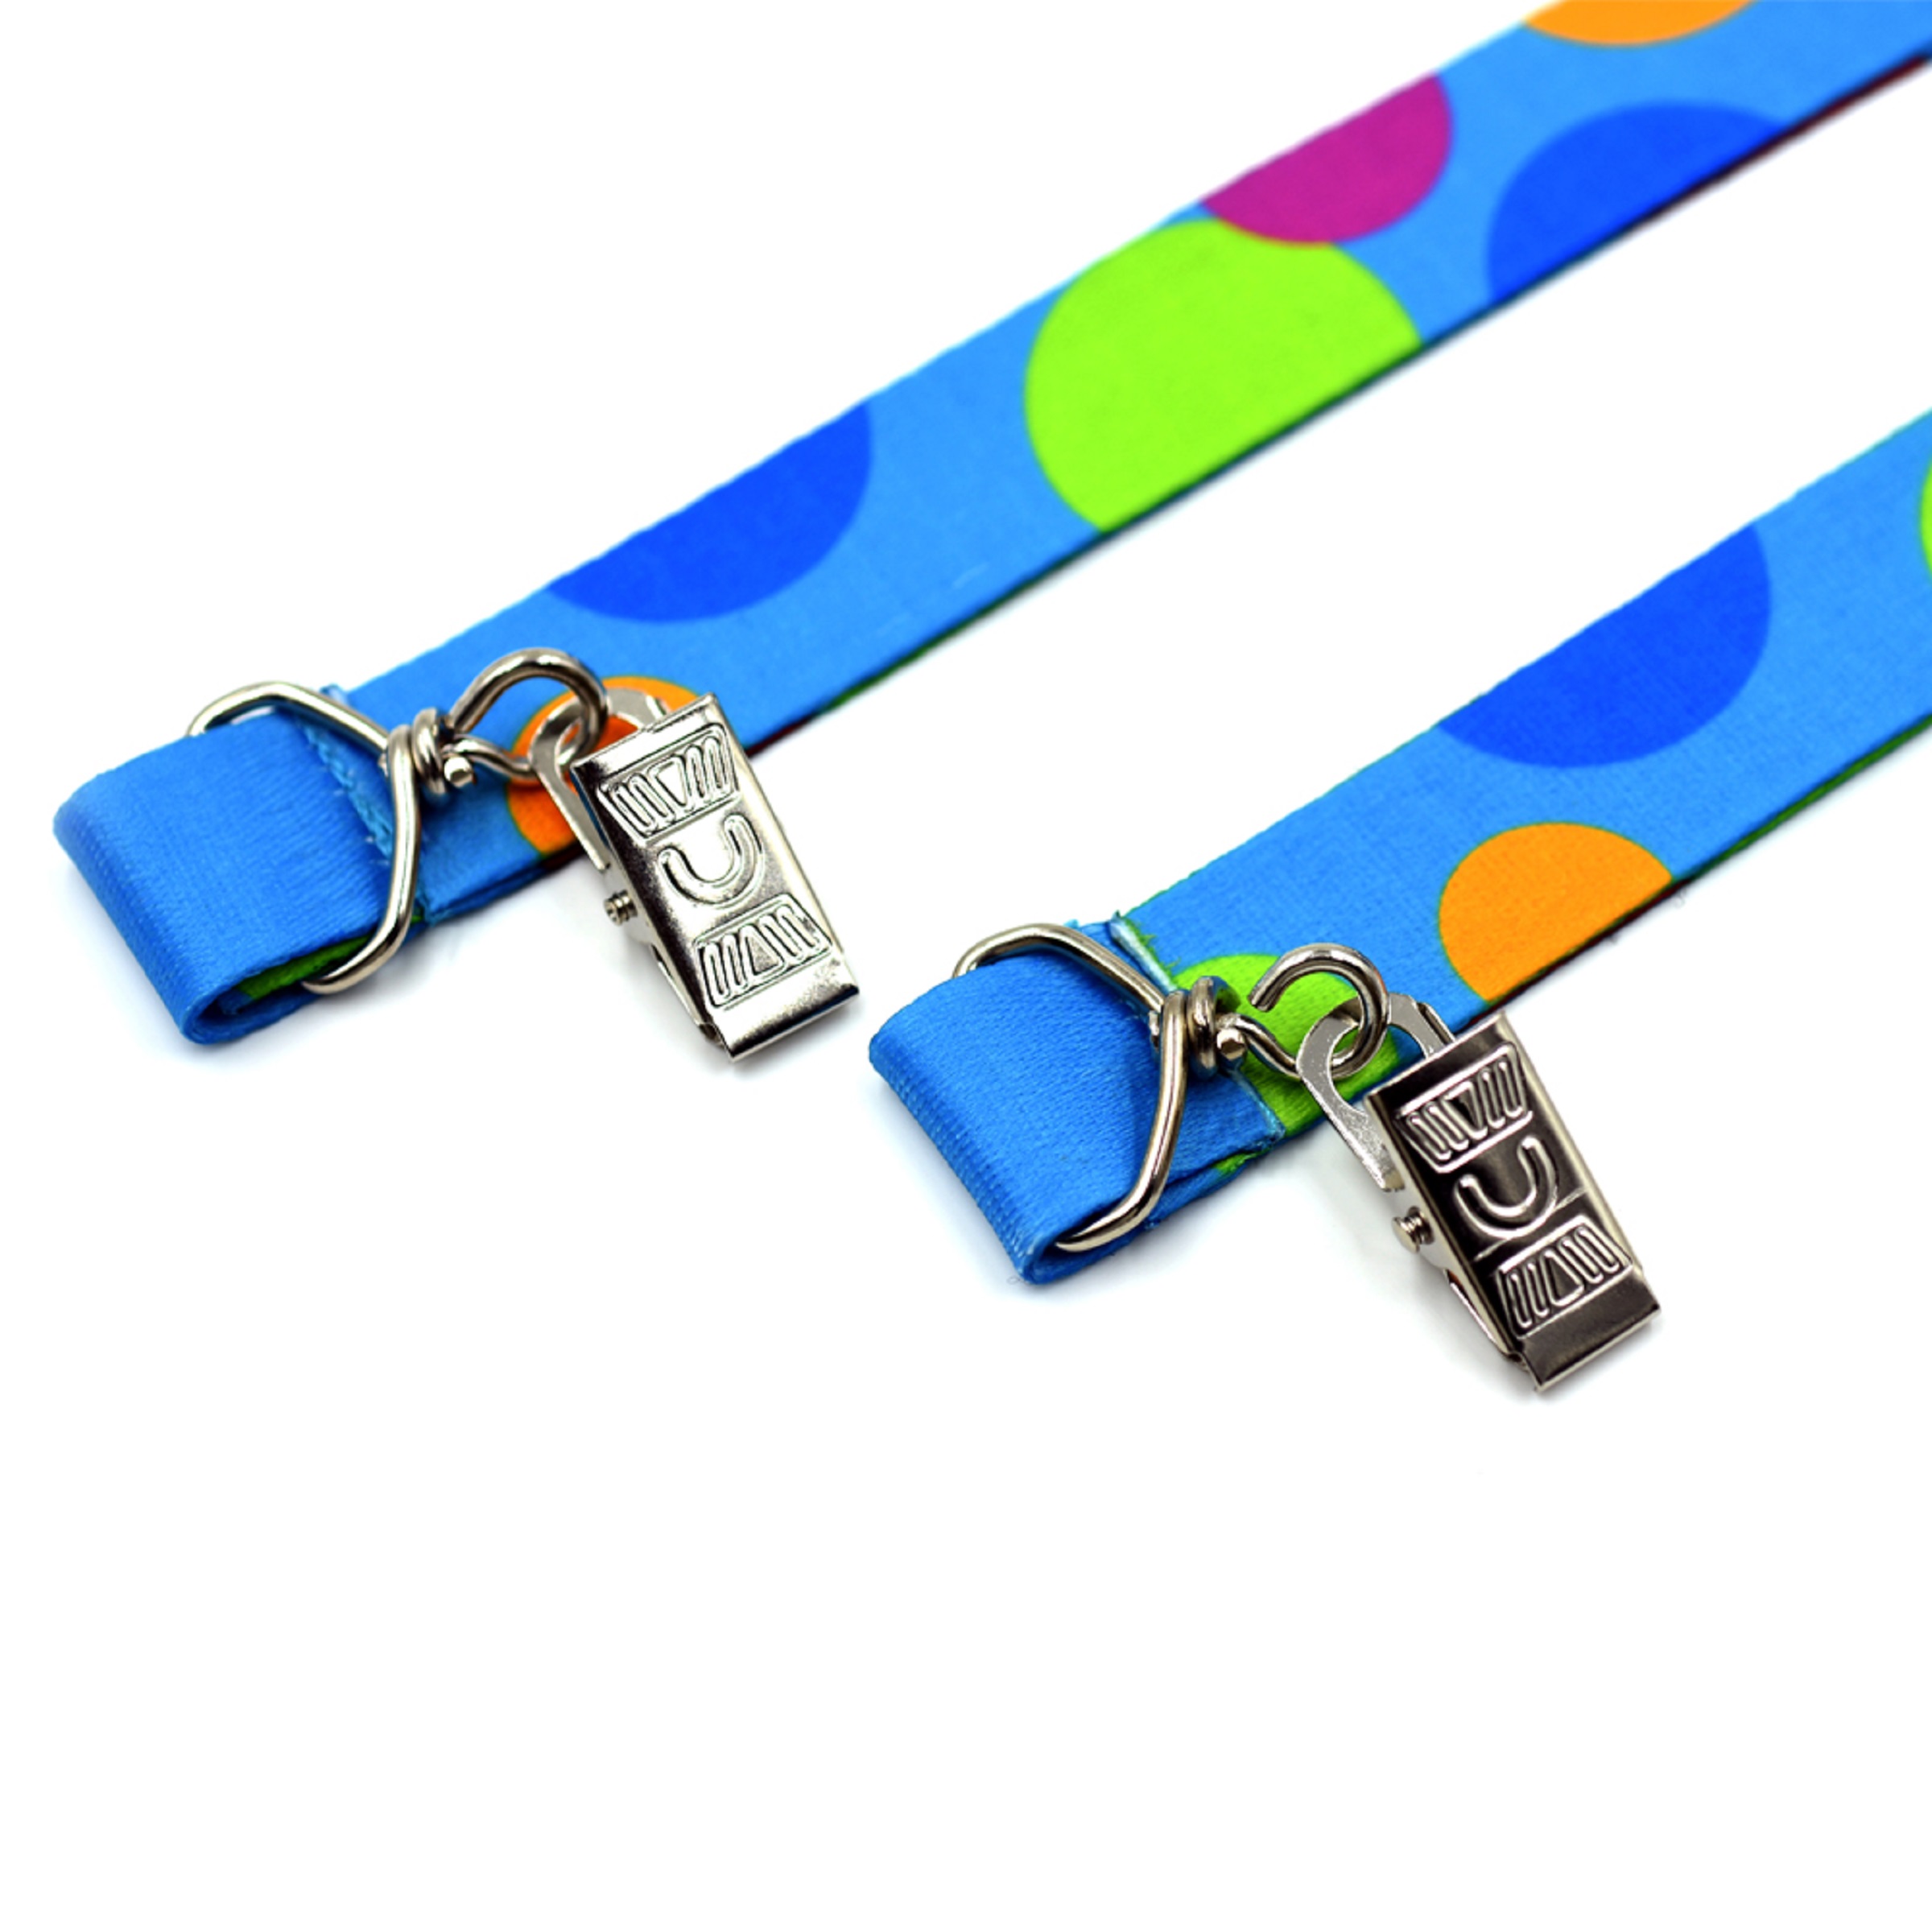 250 Blank Only - Full Color Imprint Smooth Dye Sublimation Lanyard - 1 x 36 with Setup Fee